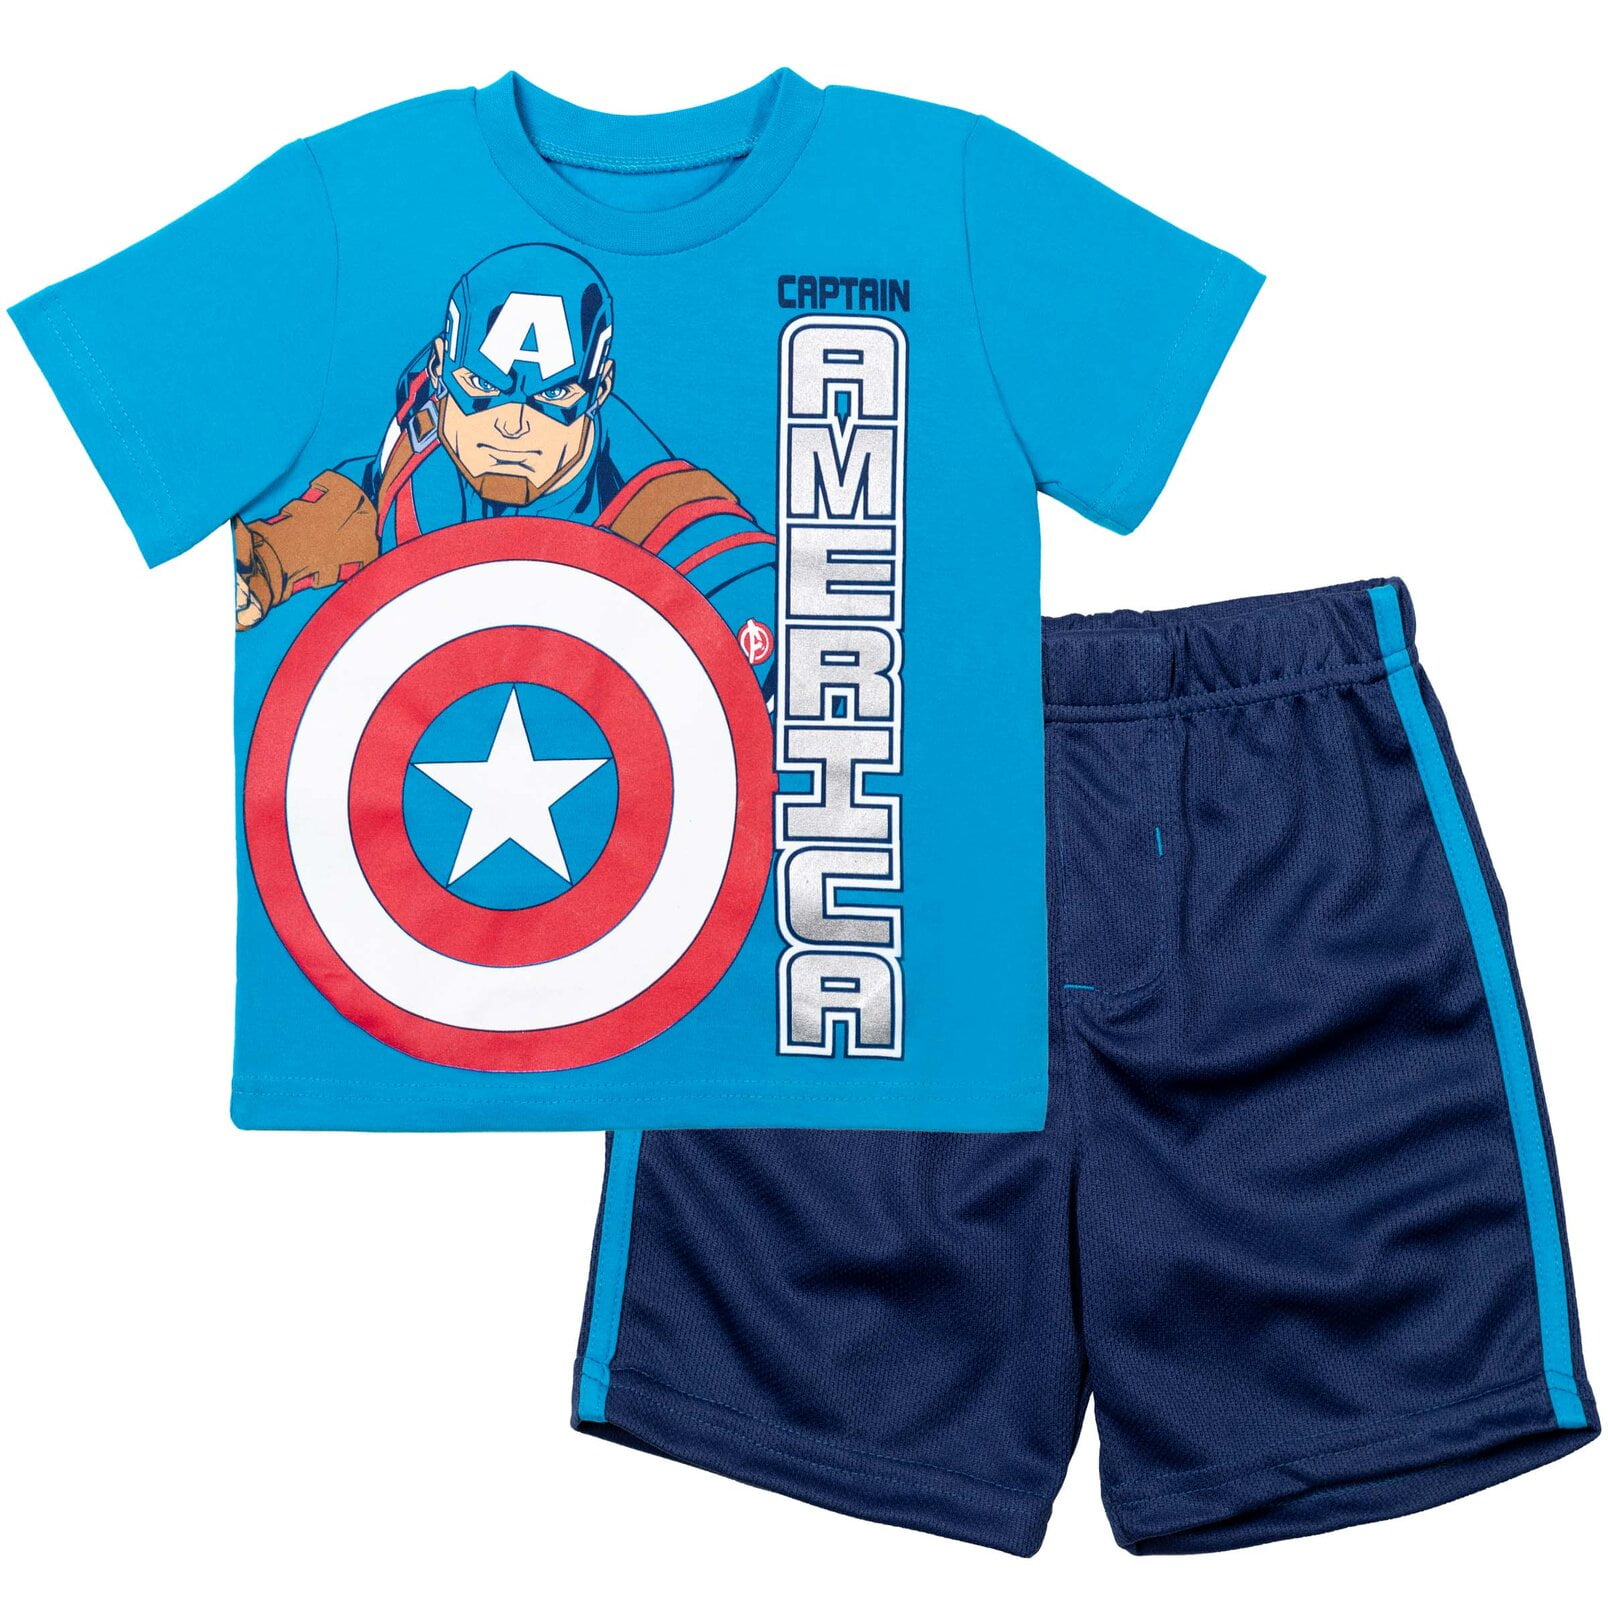 to America Captain Big Set Avengers T-Shirt Toddler and Toddler Outfit Marvel Boys MeshShorts Kid